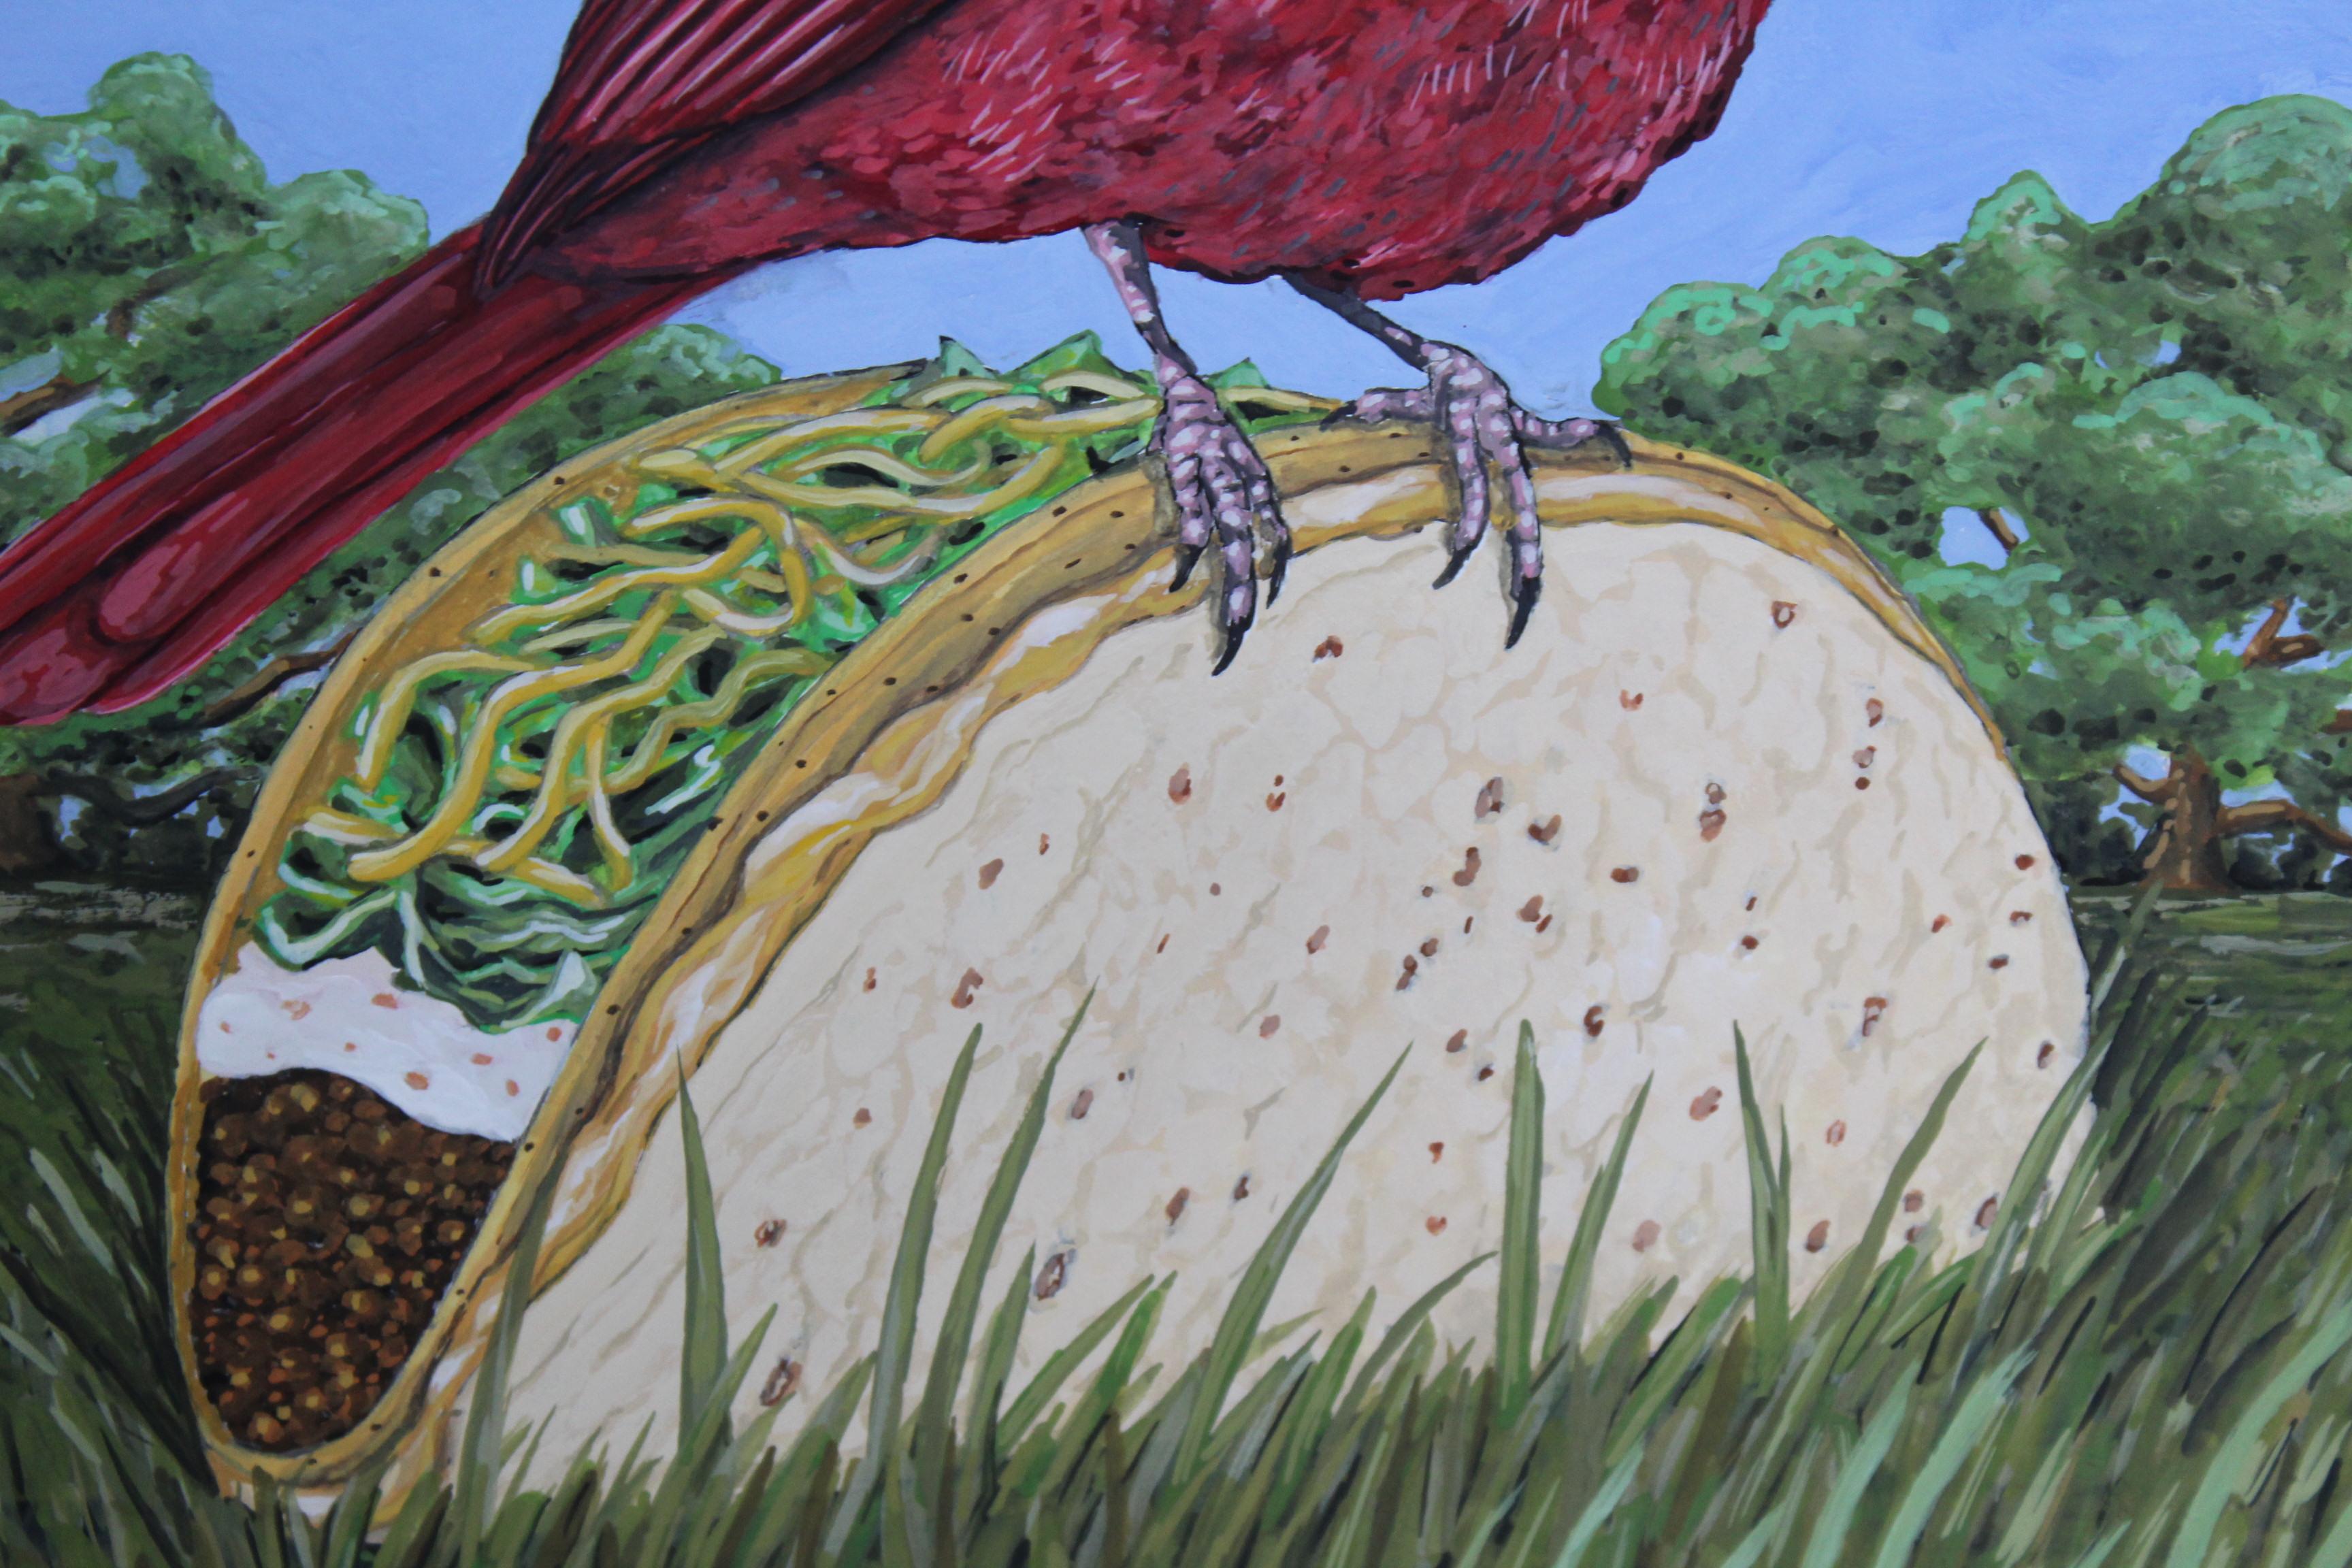 From New Orleans artist Jeff Pastorek's birds on fast food series, this painting displays a cardinal on a Taco Bell Cheesy Gordita Crunch.